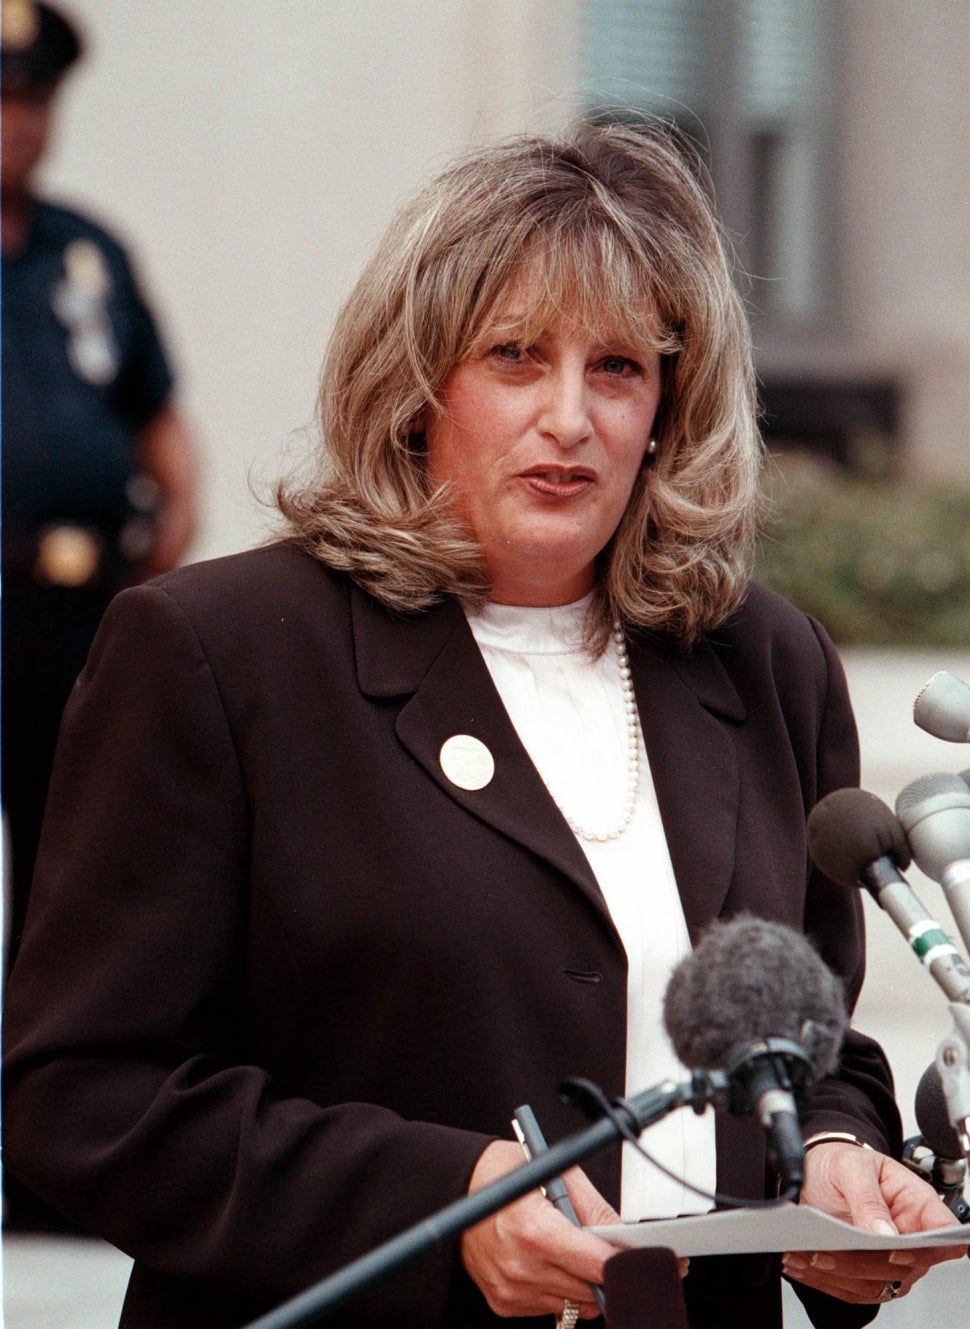 Linda Tripp talks to the press outside the Federal Courthouse July 29, 1998 in Washington, DC. After finishing her testimony before Kenneth Starr's grand jury, Linda Tripp, whose tape recordings of Monica Lewinsky led to an investigation of an alleged presidential affair, spoke at length publicly for the first time, saying she was an average American.